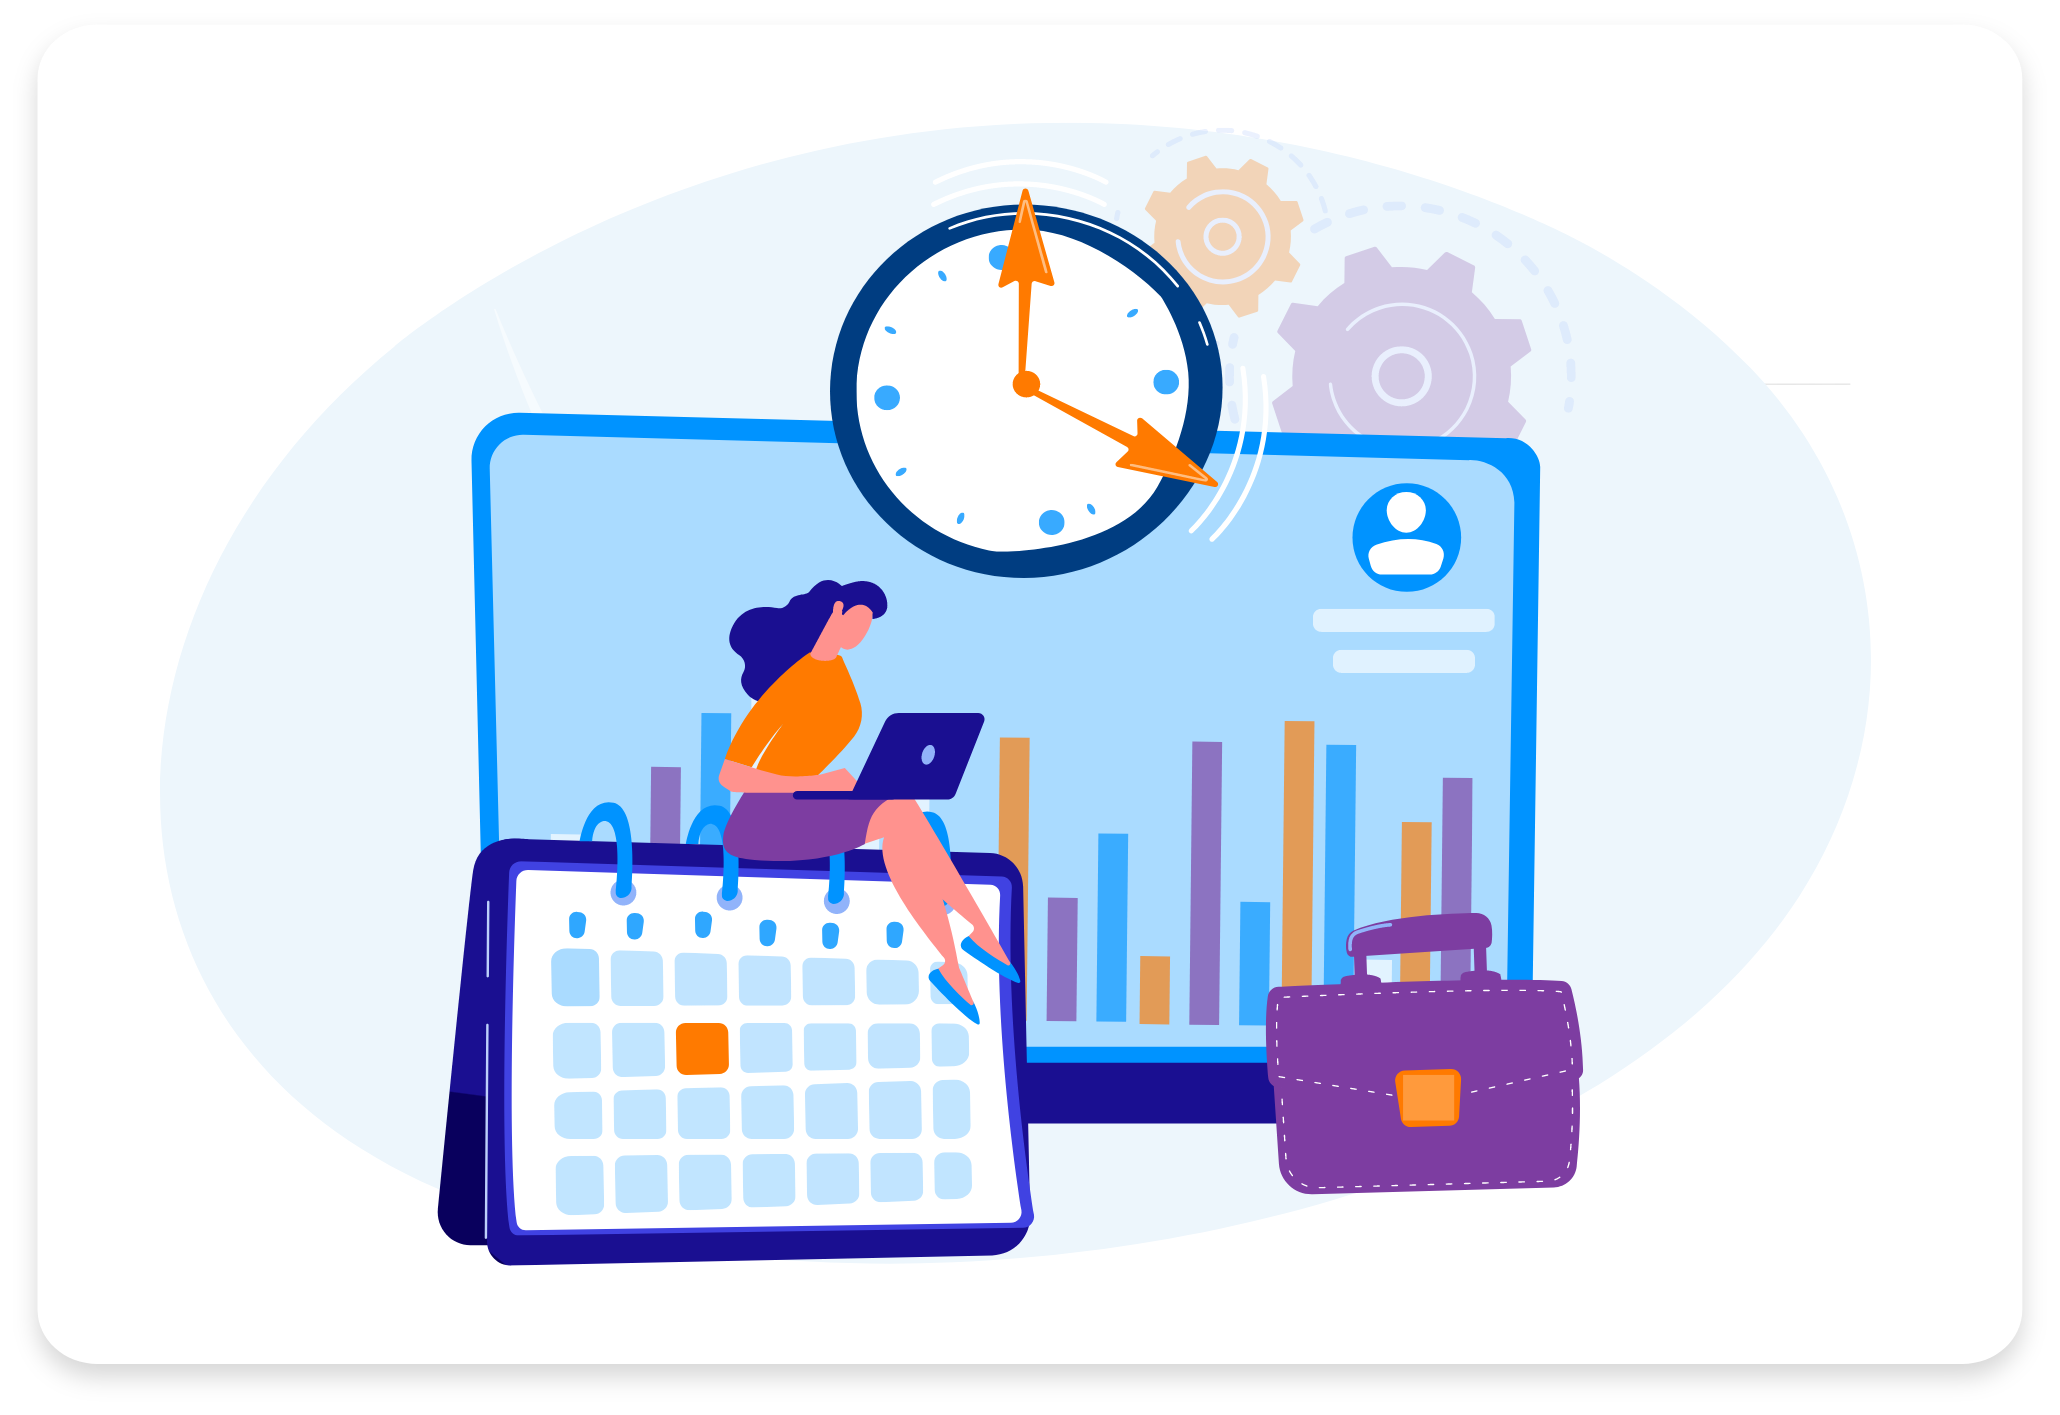 Vector illustration of time tracking or time monitoring of an employee.